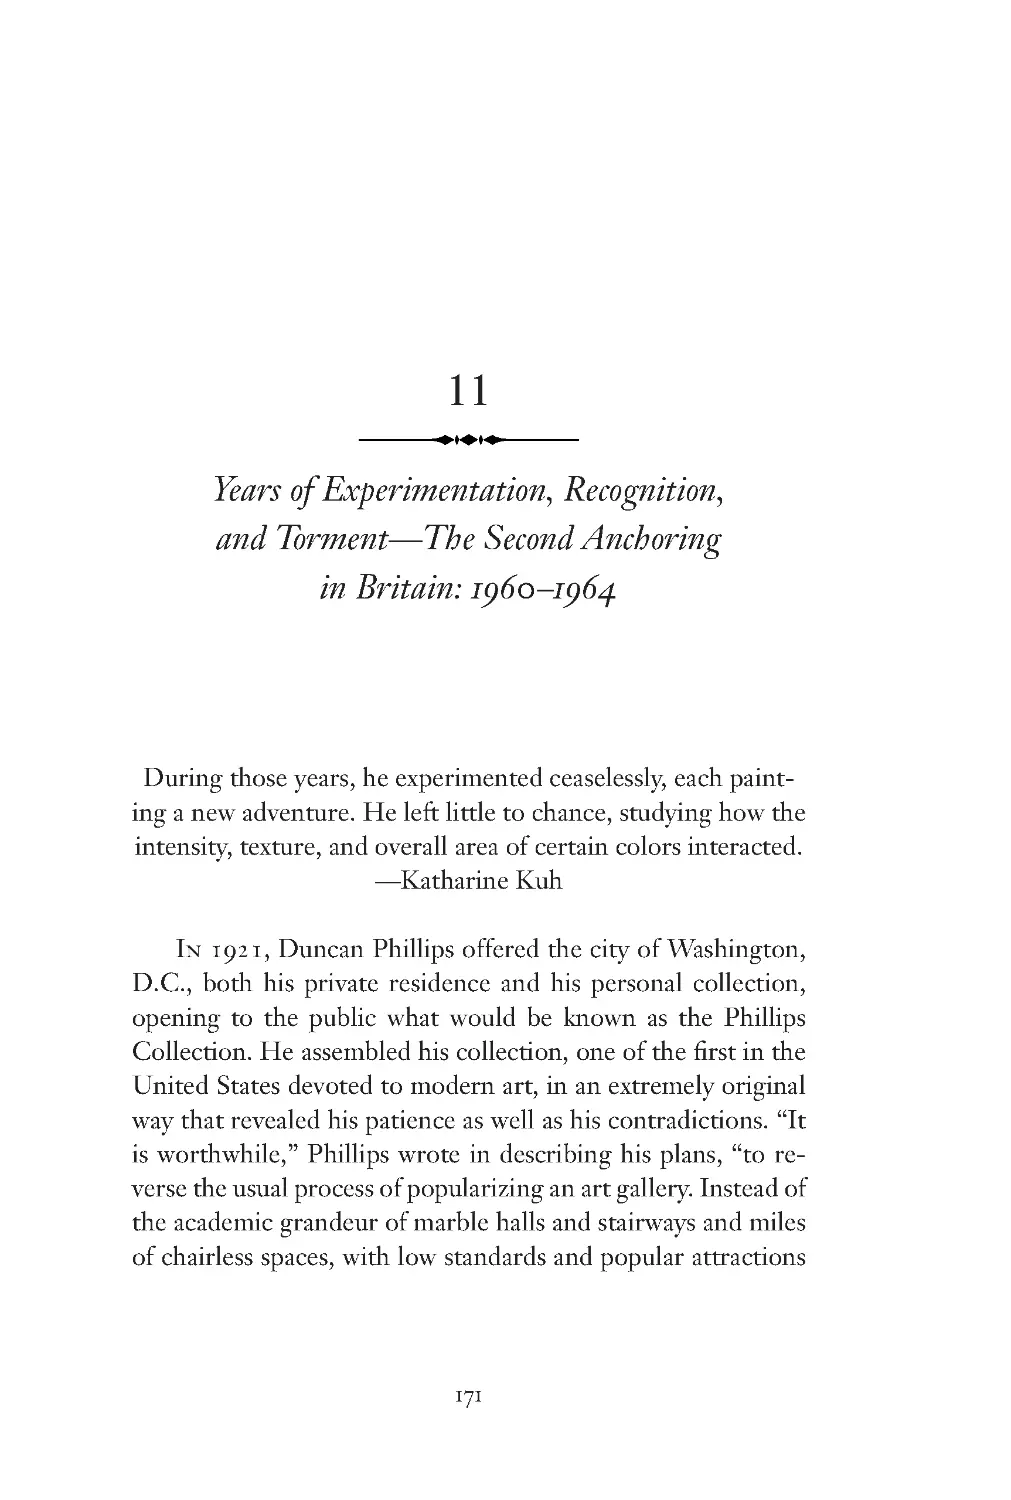 11. Years of Experimentation, Recognition, and Torment—The Second Anchoring in Britain: 1960–1964